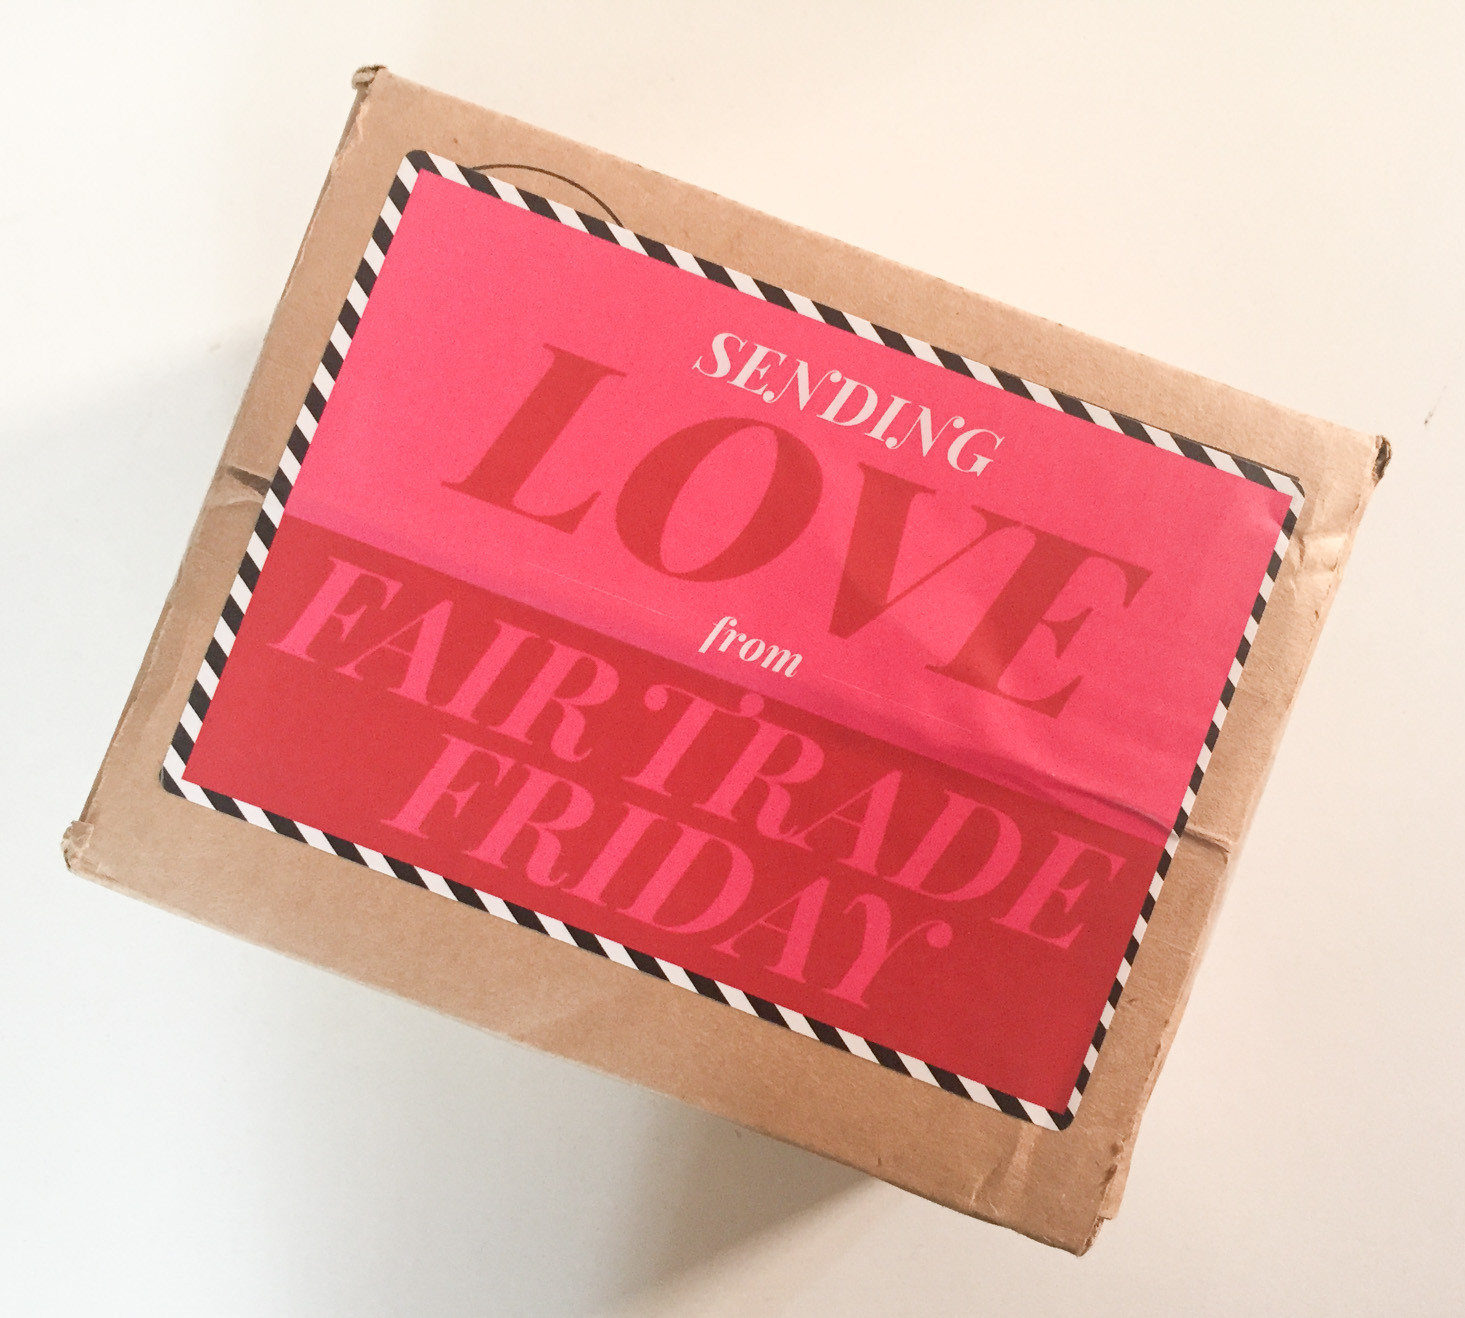 Fair Trade Friday Subscription Box Review – February 2018